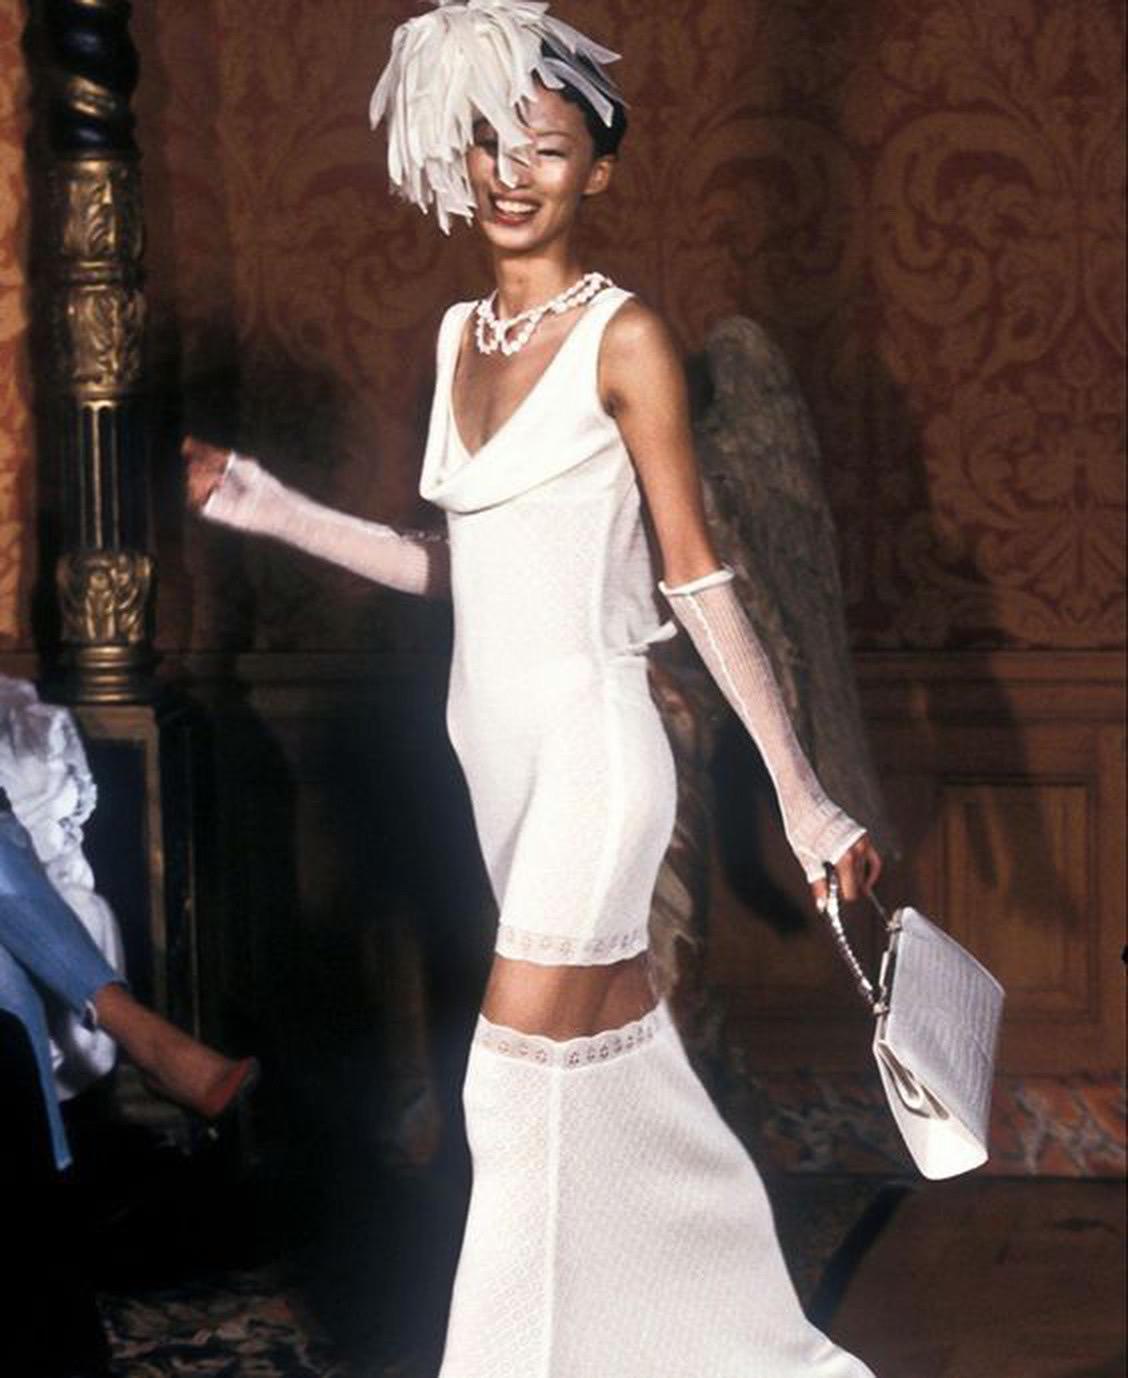 A totally breathtaking and highly coveted John Galliano ivory stretch knit bias cut slip gown dating back to his epic spring/summer 1998 collection. These early documented runway examples of his work are very collectable and are becoming incredibly